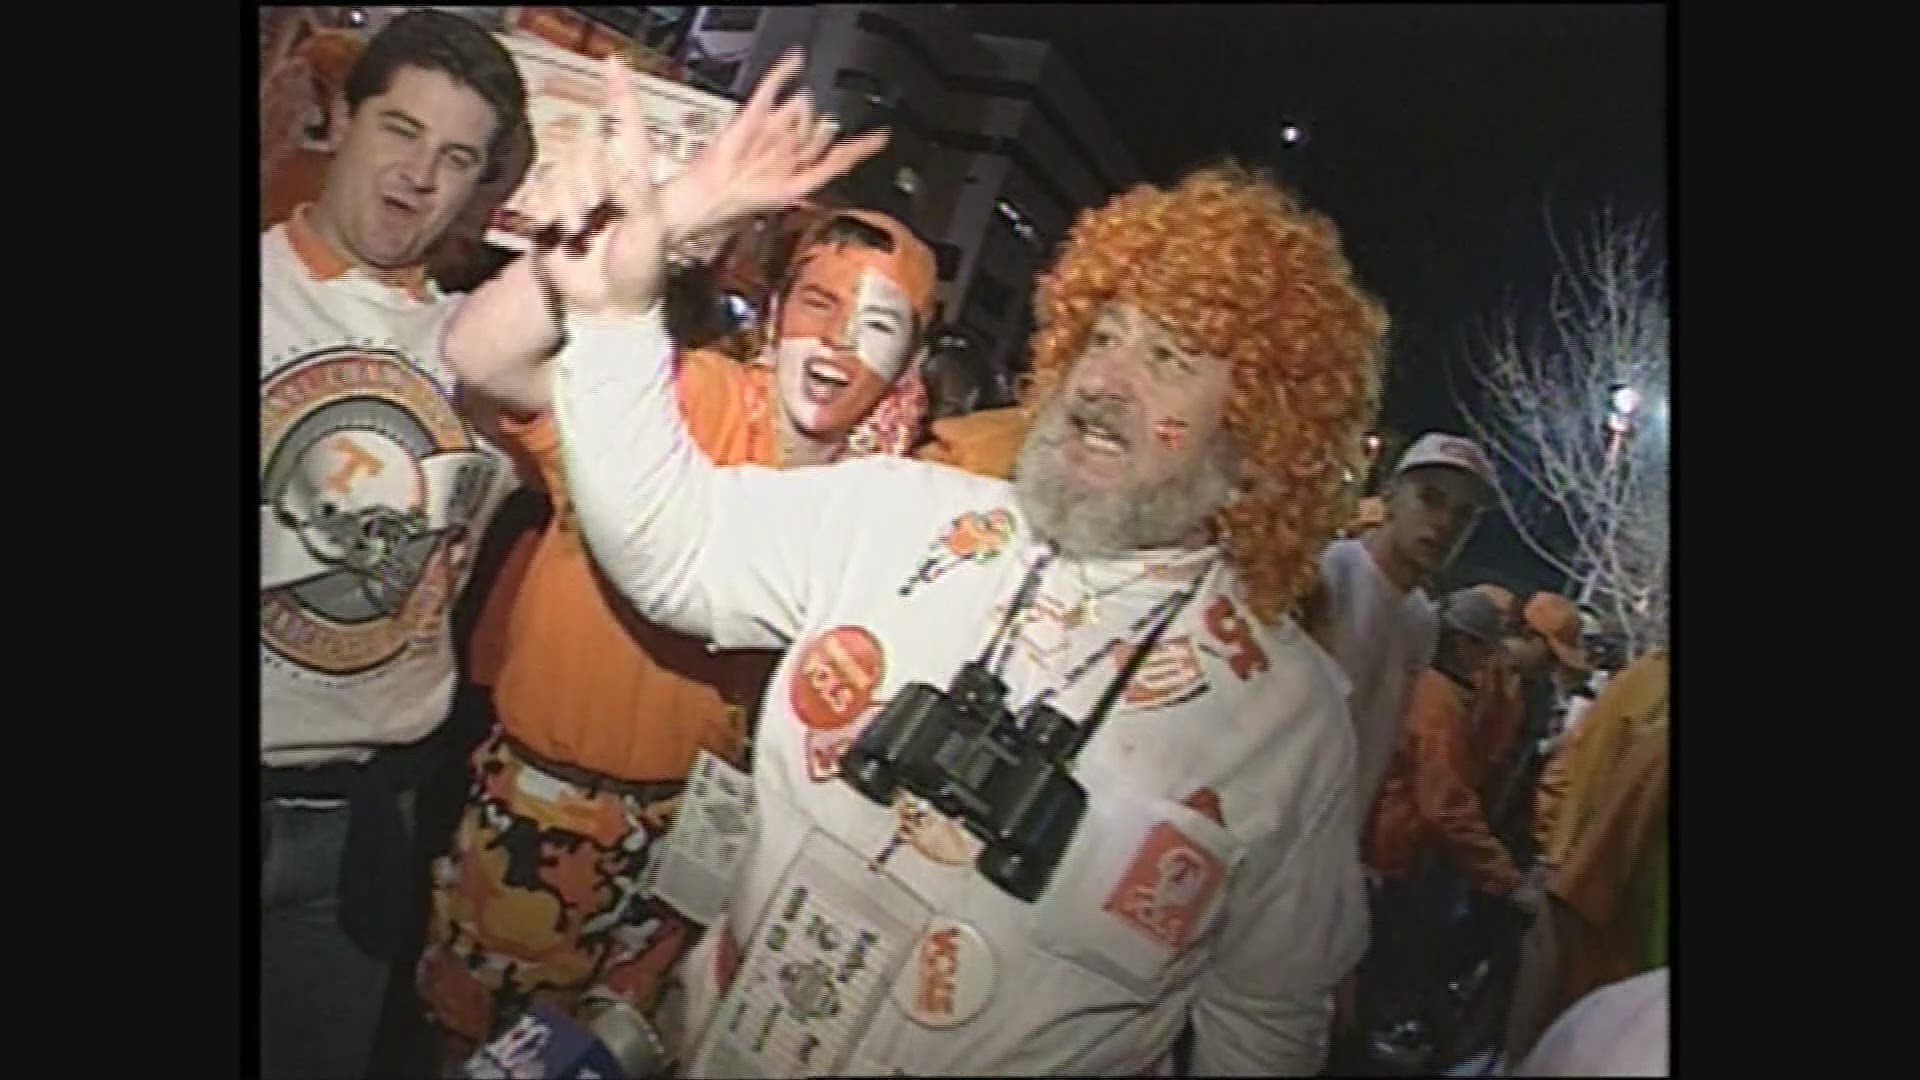 Vol fans celebrated hard after the team's win in the 1998 Fiesta Bowl.